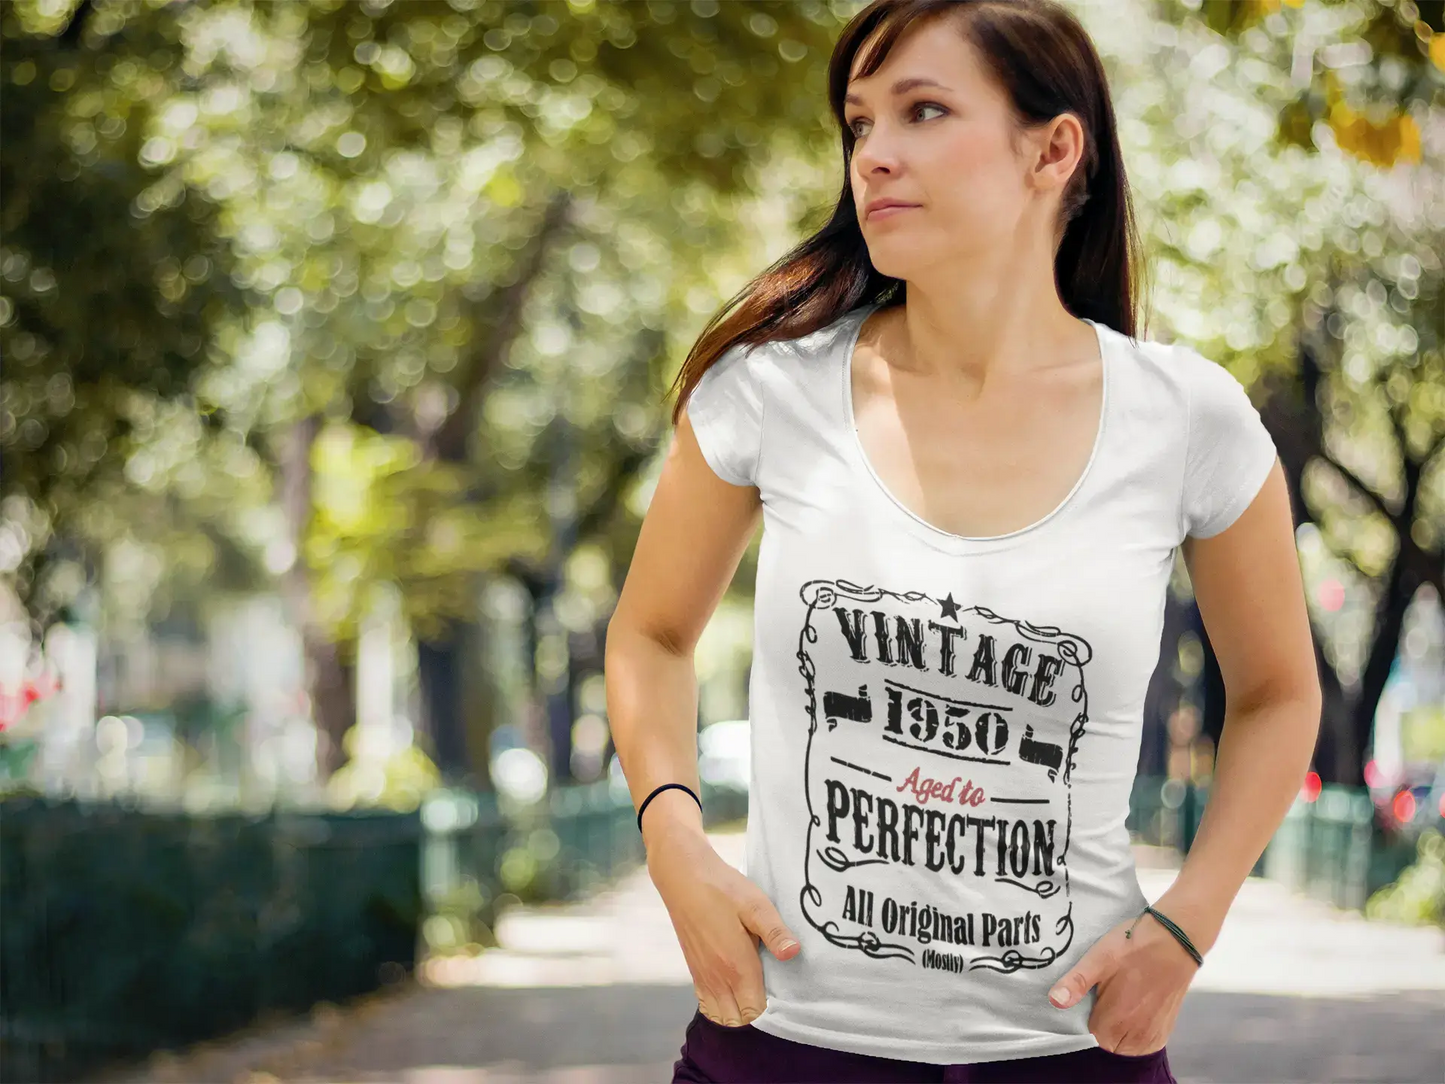 1950 Vintage Aged to Perfection Women's T-shirt White Birthday Gift 00491